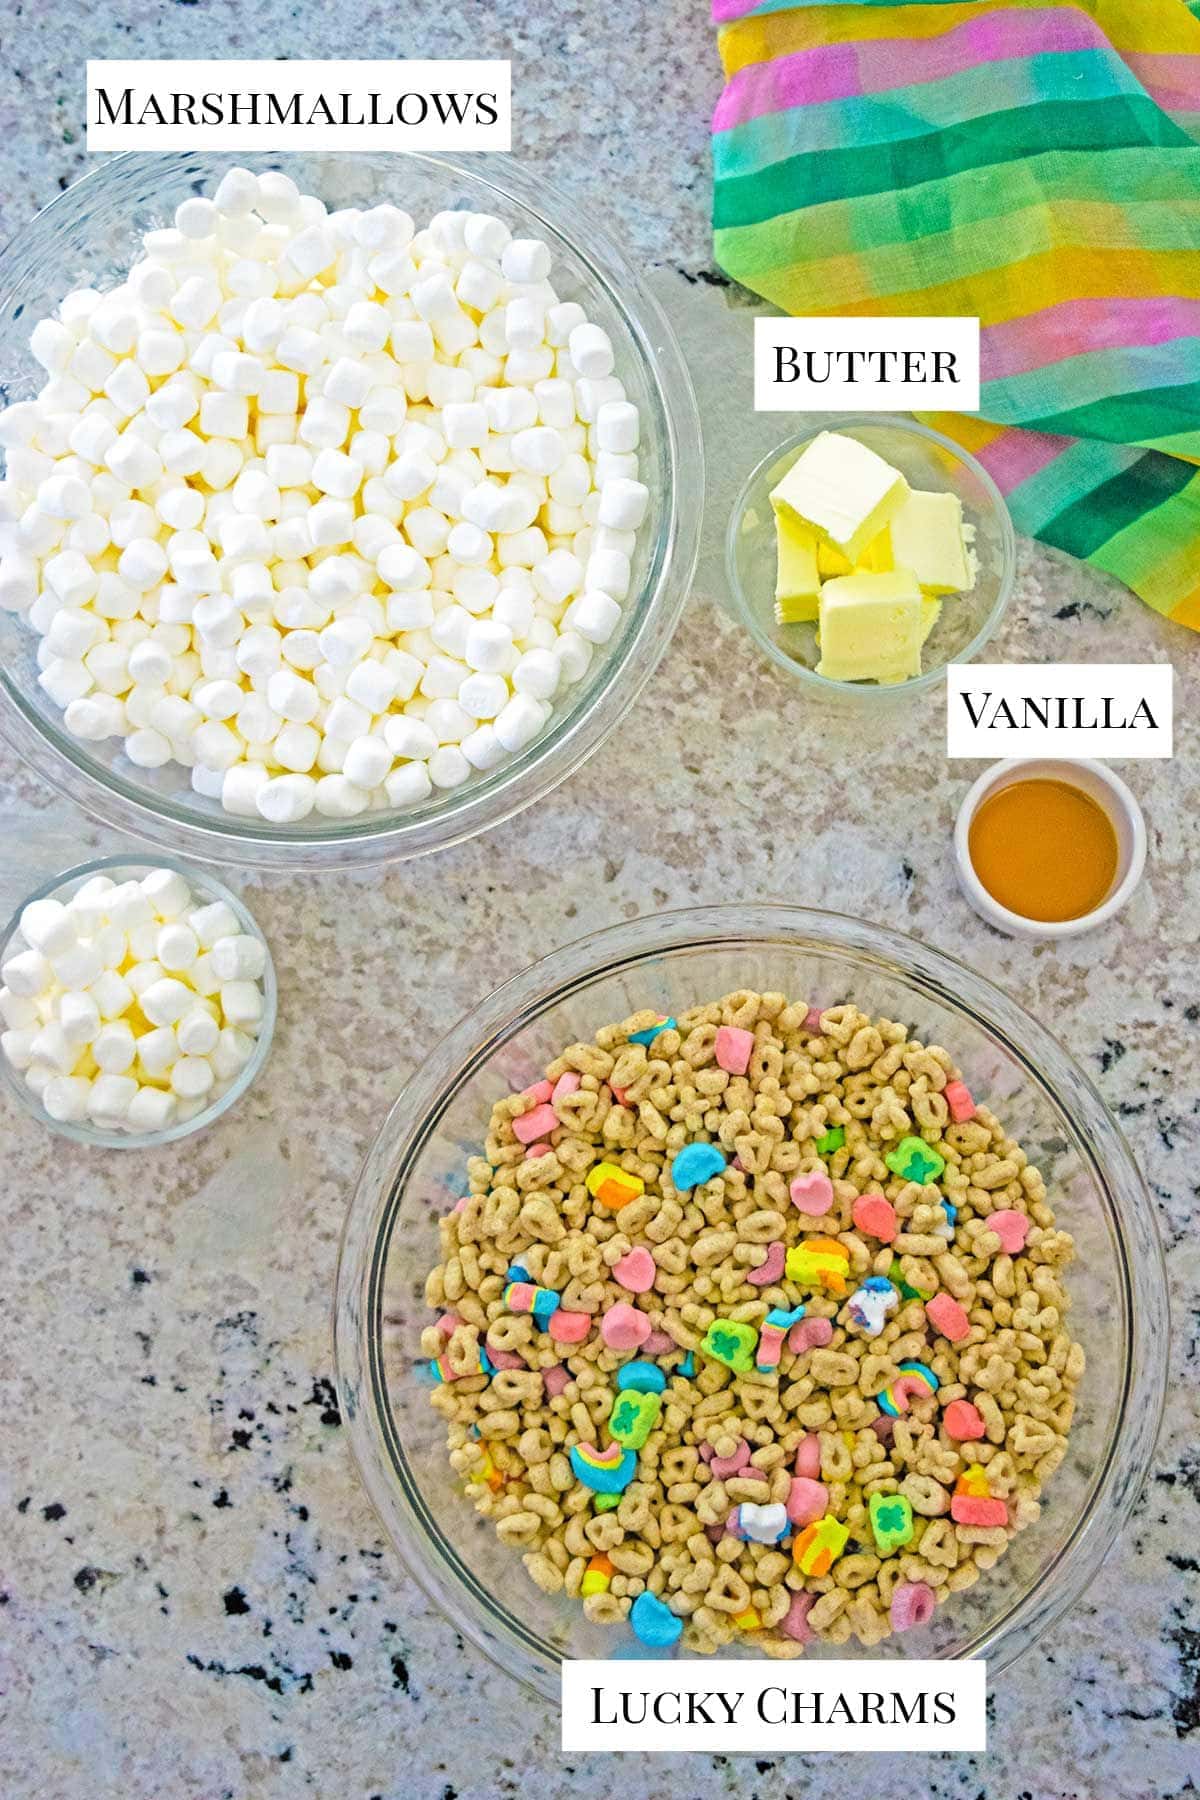 Picture of ingredients for Lucky Charms treats - marshmallows, butter, vanilla extract, and Lucky Charms cereal.